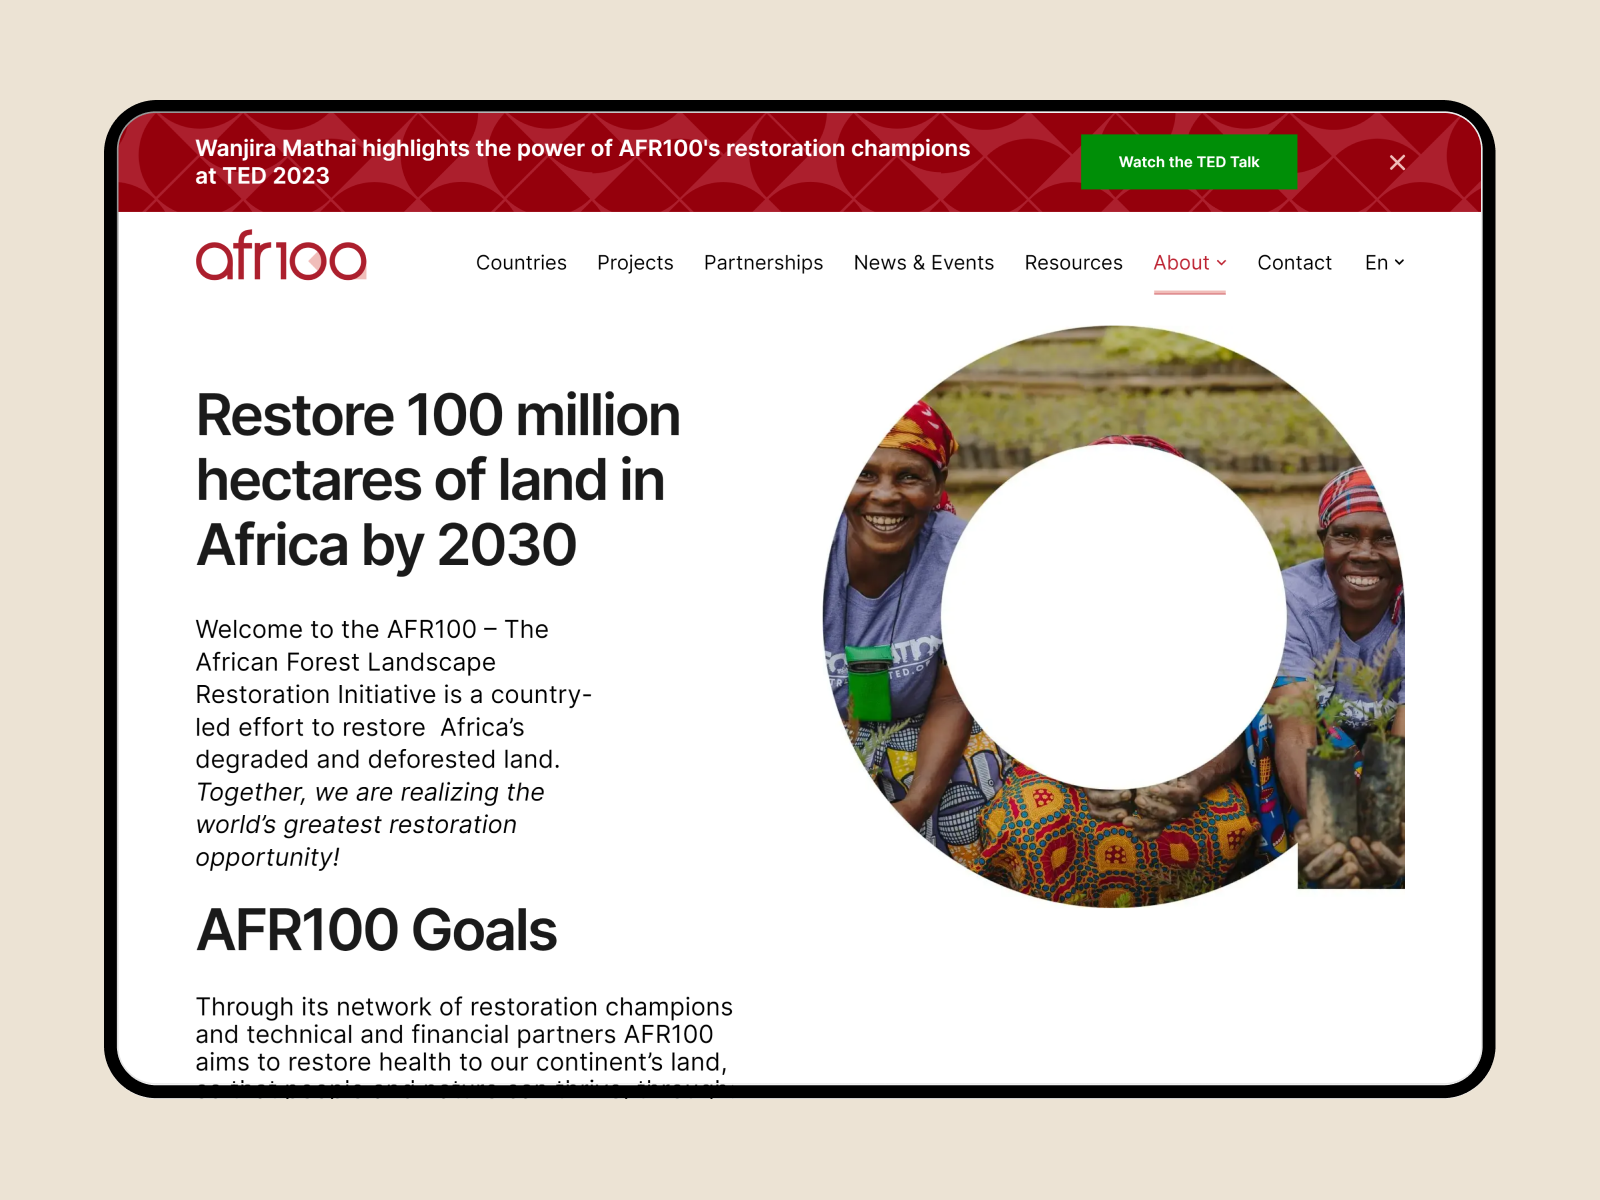 The African Forest Landscape Restoration Initiative